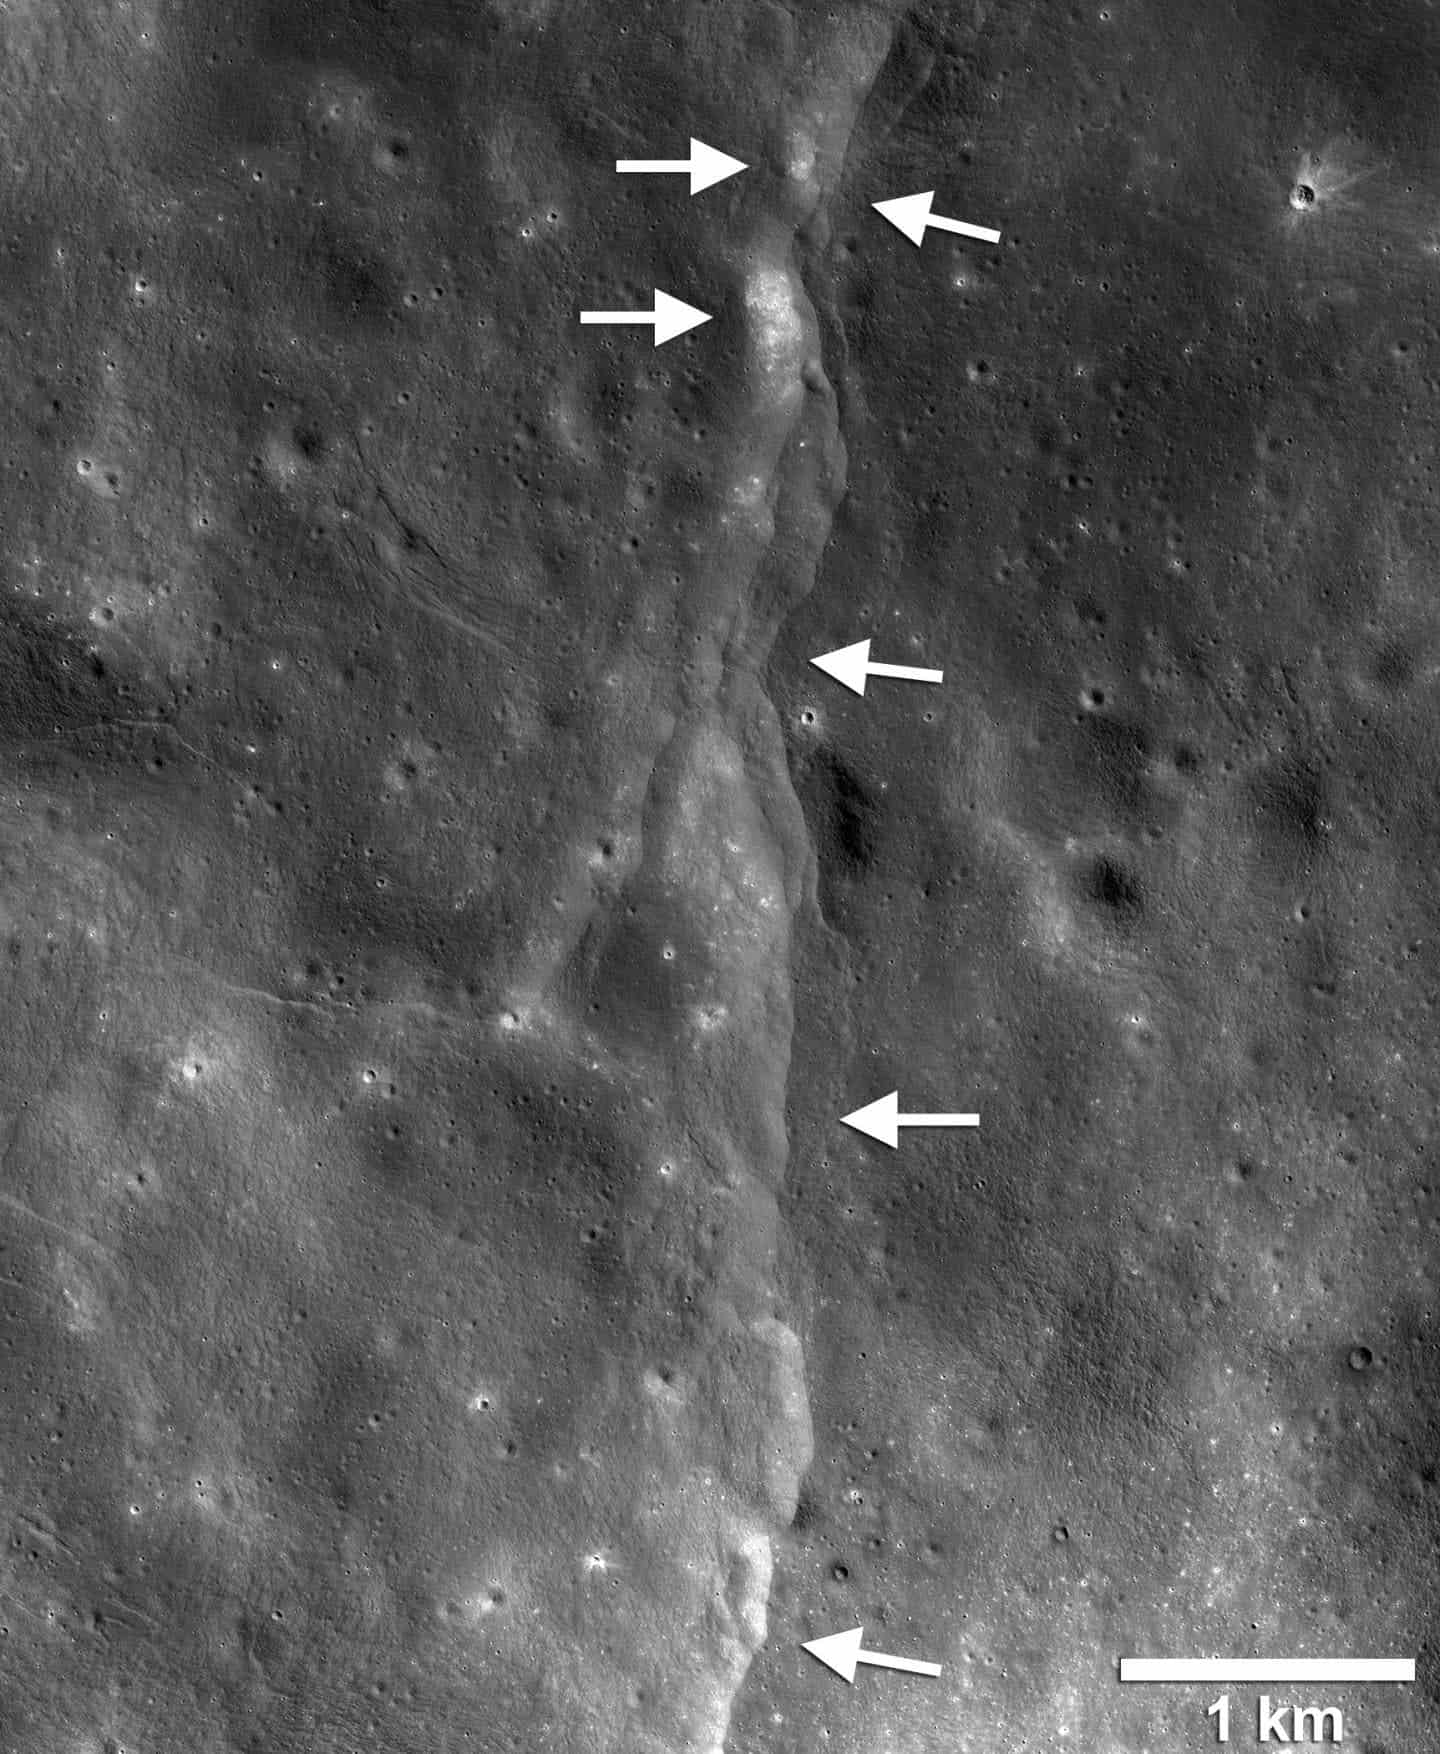 This prominent thrust fault is one of thousands discovered on the moon by NASA's Lunar Reconnaissance Orbiter (LRO). New research suggests that these faults may still be active today, producing moonquakes. Credit: NASA/GSFC/Arizona State University/Smithsonian.